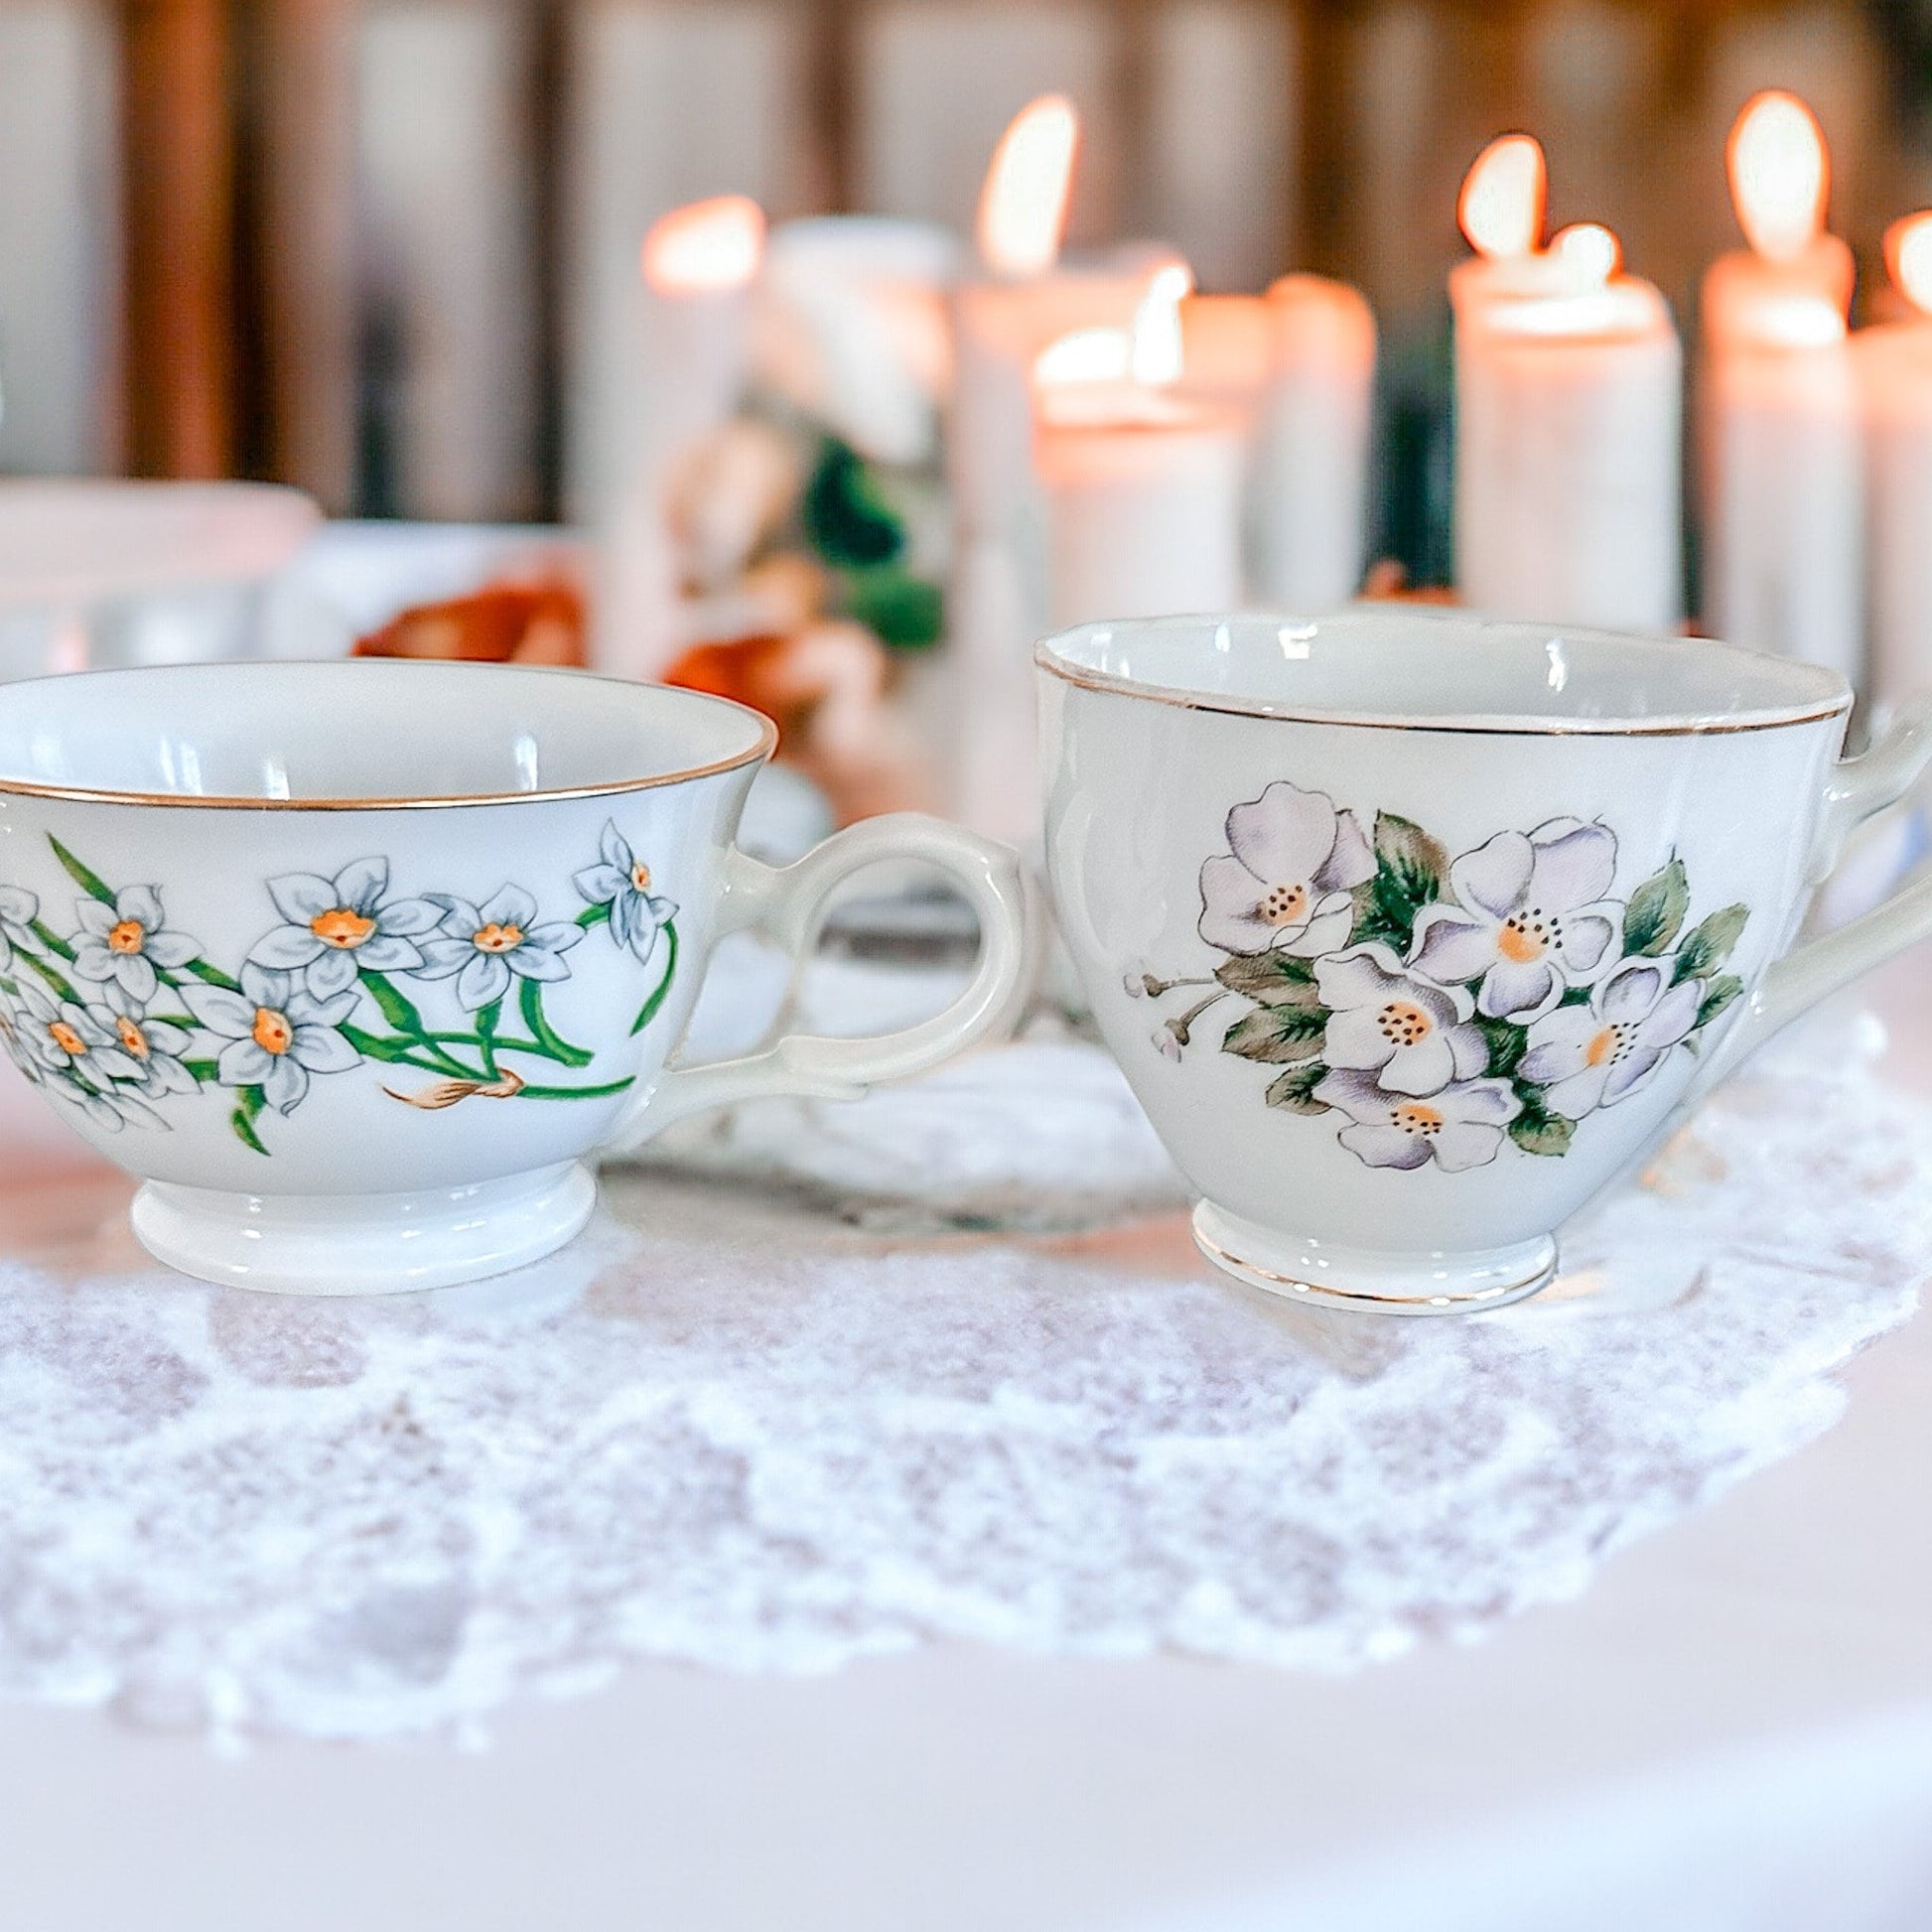 Scented Candle, Vintage, China, Teacup, Thinking of You Gift